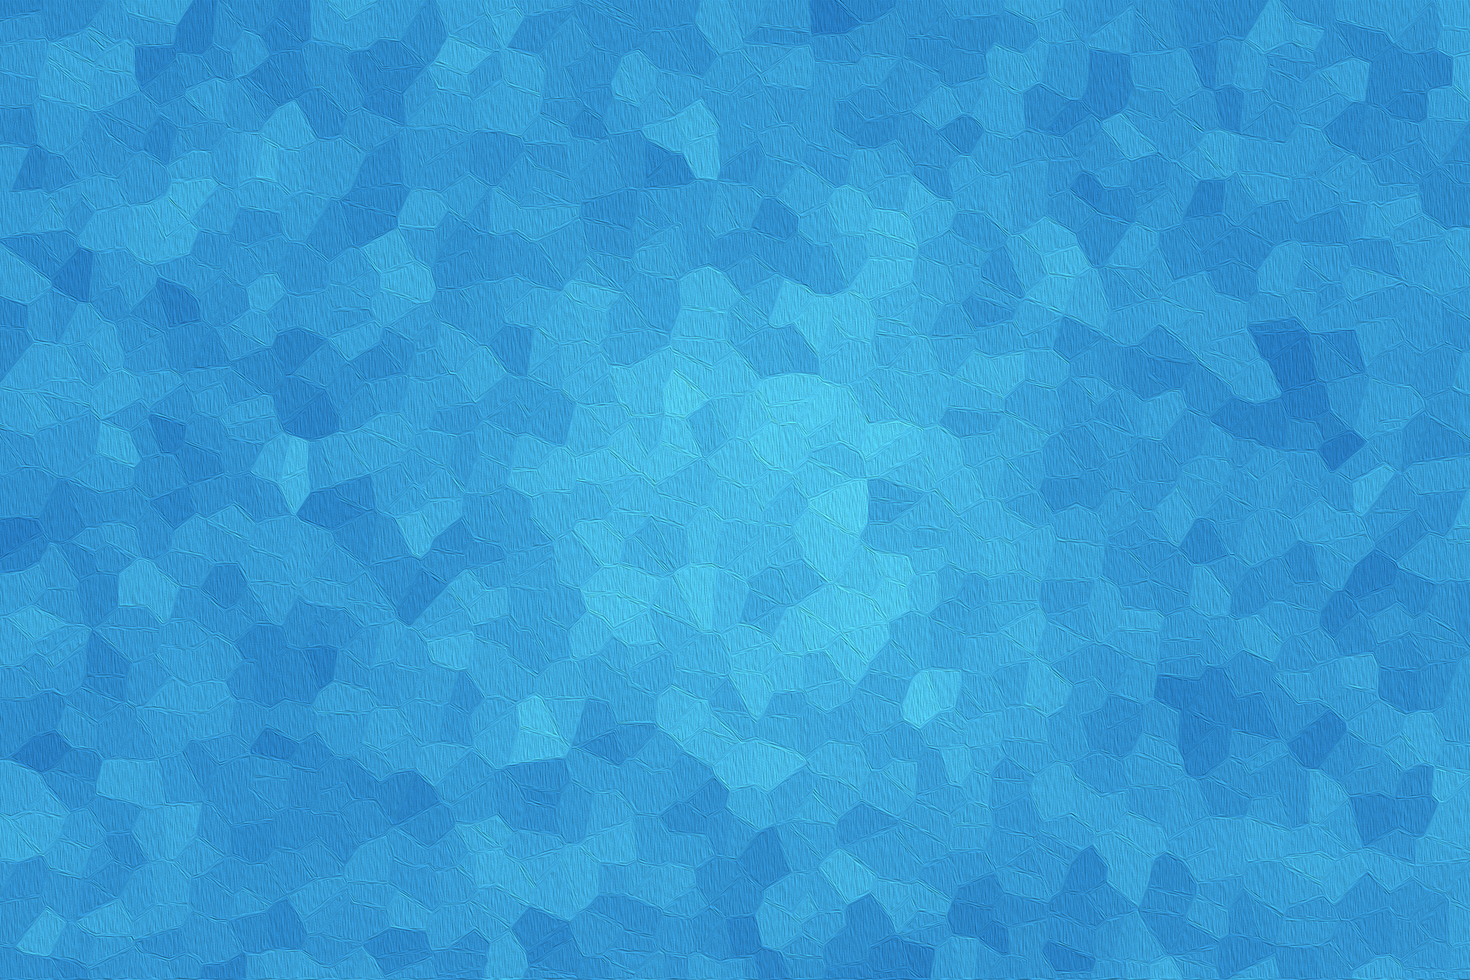 Free vector modern blue geometric shapes background psd